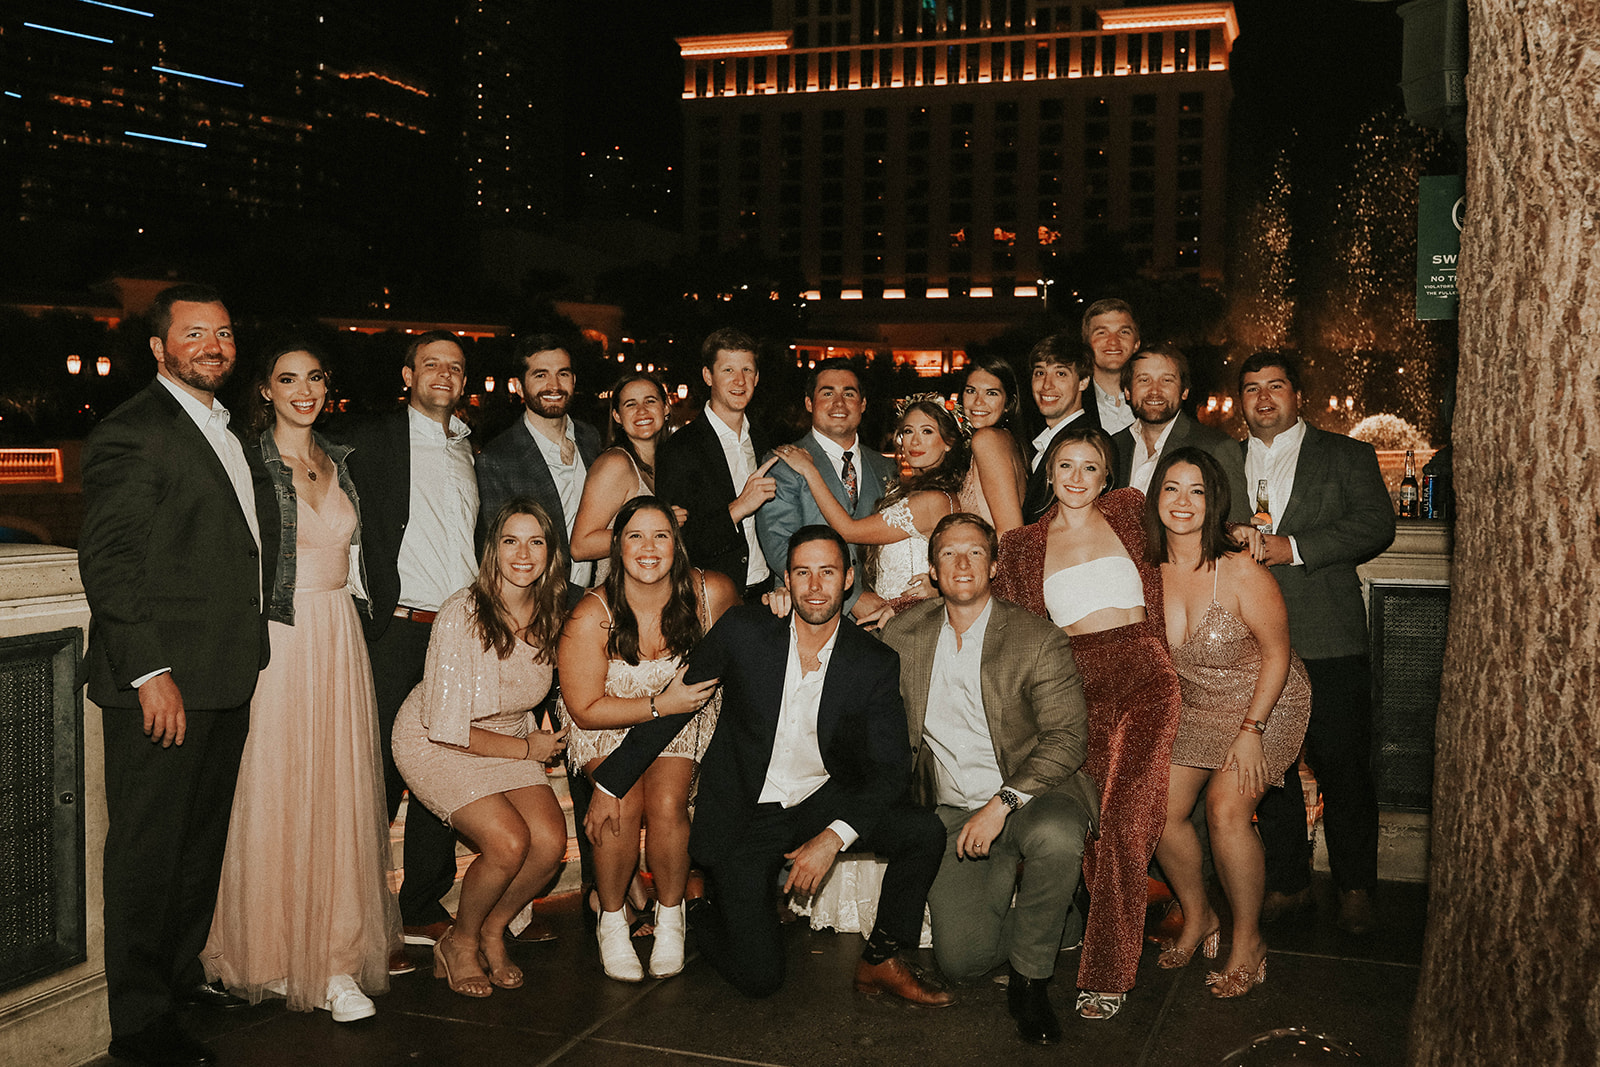 Newlyweds Meet up With Group of Friends at Bellagio Fountain after Dry Lake Bed Fall Inspired Elopement with Just the Two of Them 